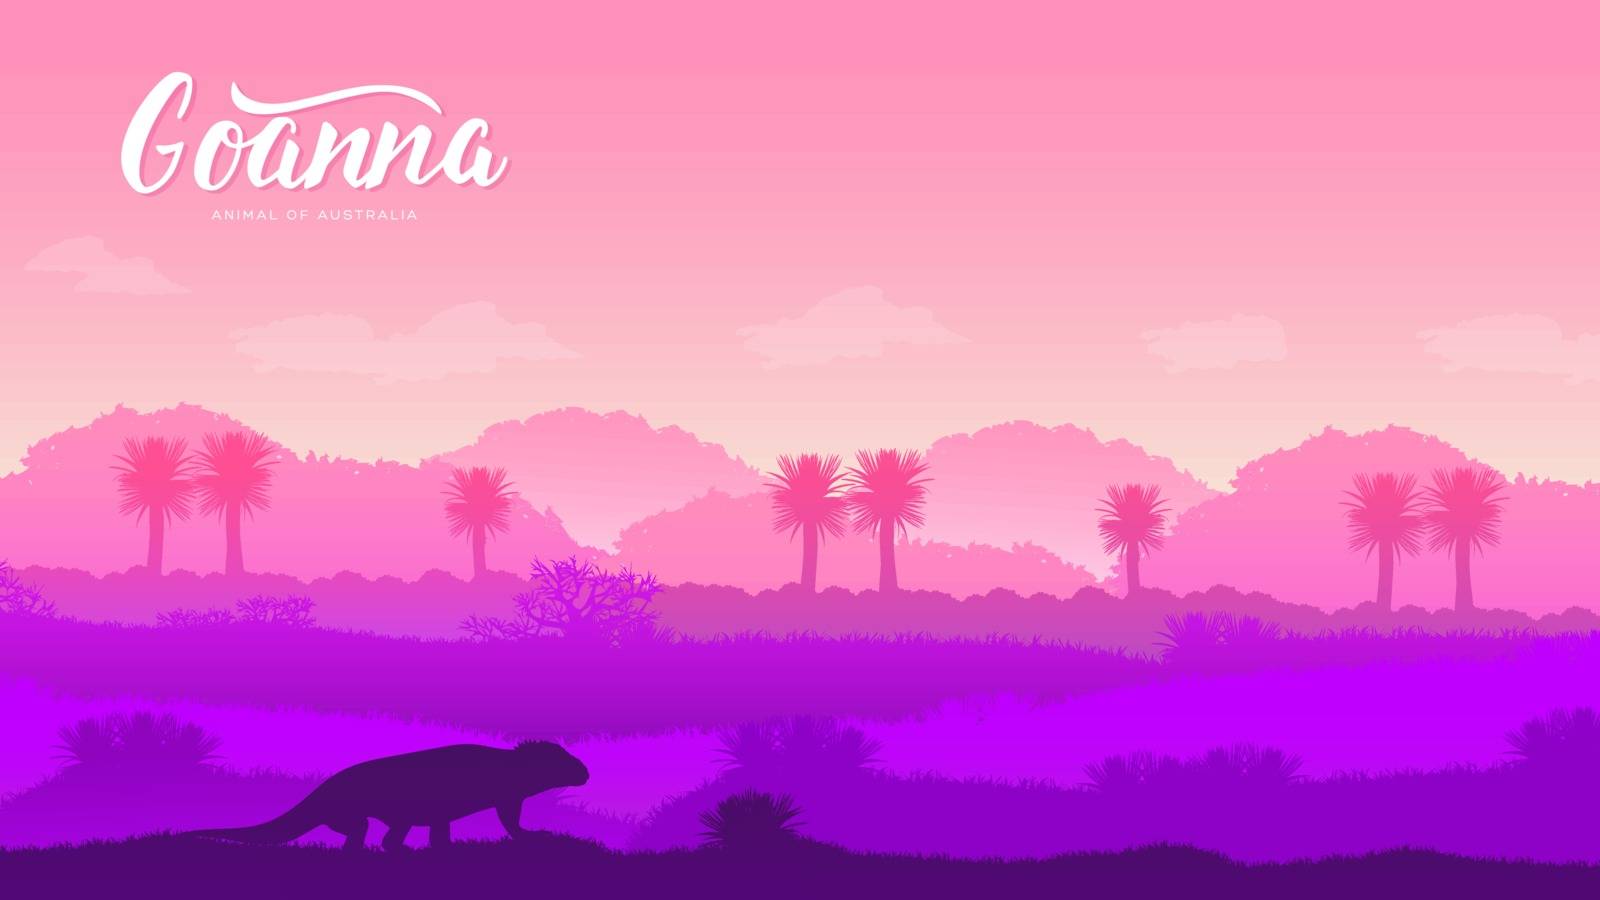  goanna hunt for prey in the desert illustration. Silhouette of a wild animal in Australia background. Landscape of mountains in the wild design concept by Linetale